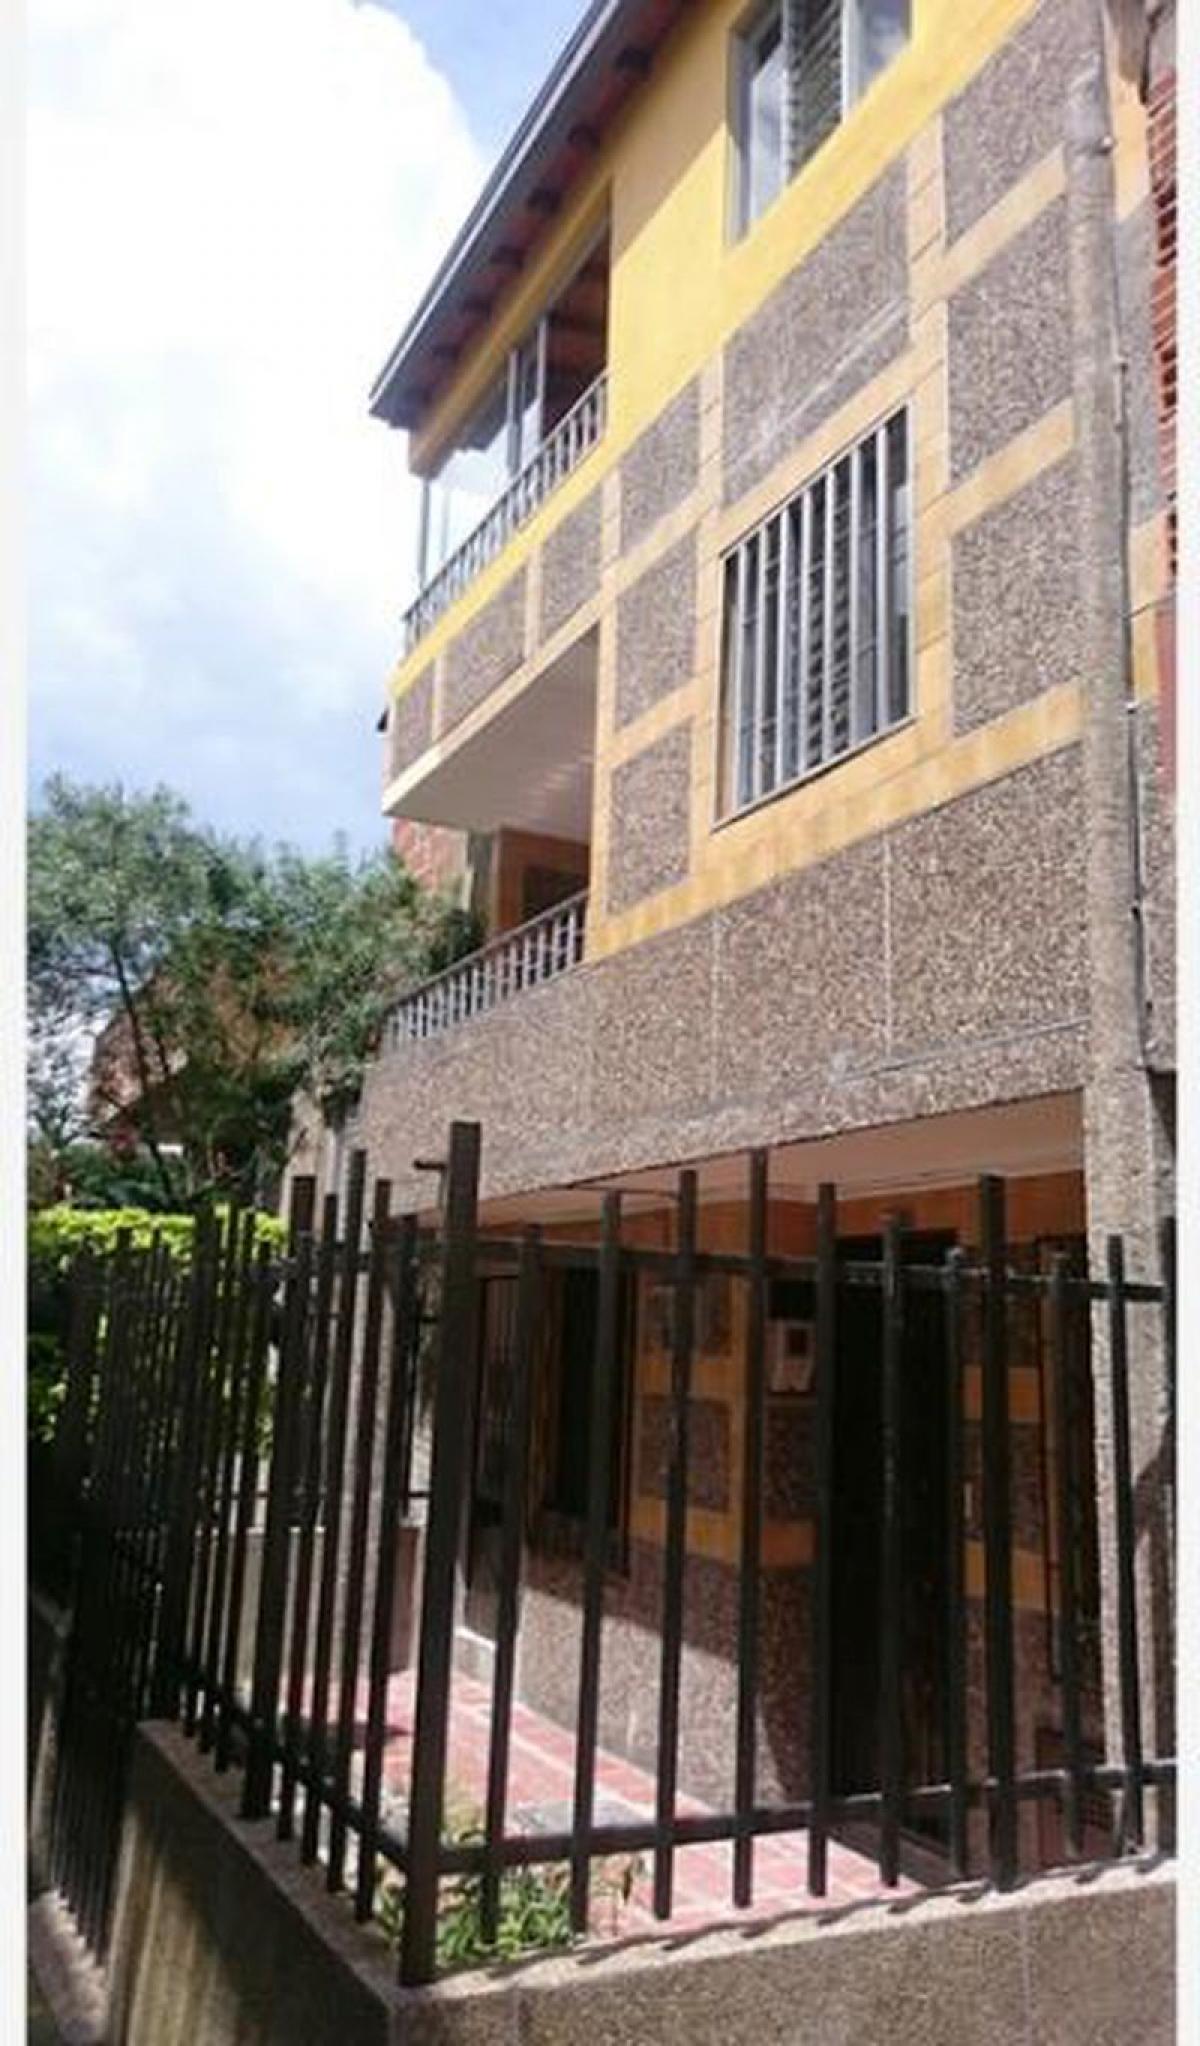 Picture of Apartment Building For Sale in Medellin, Antioquia, Colombia